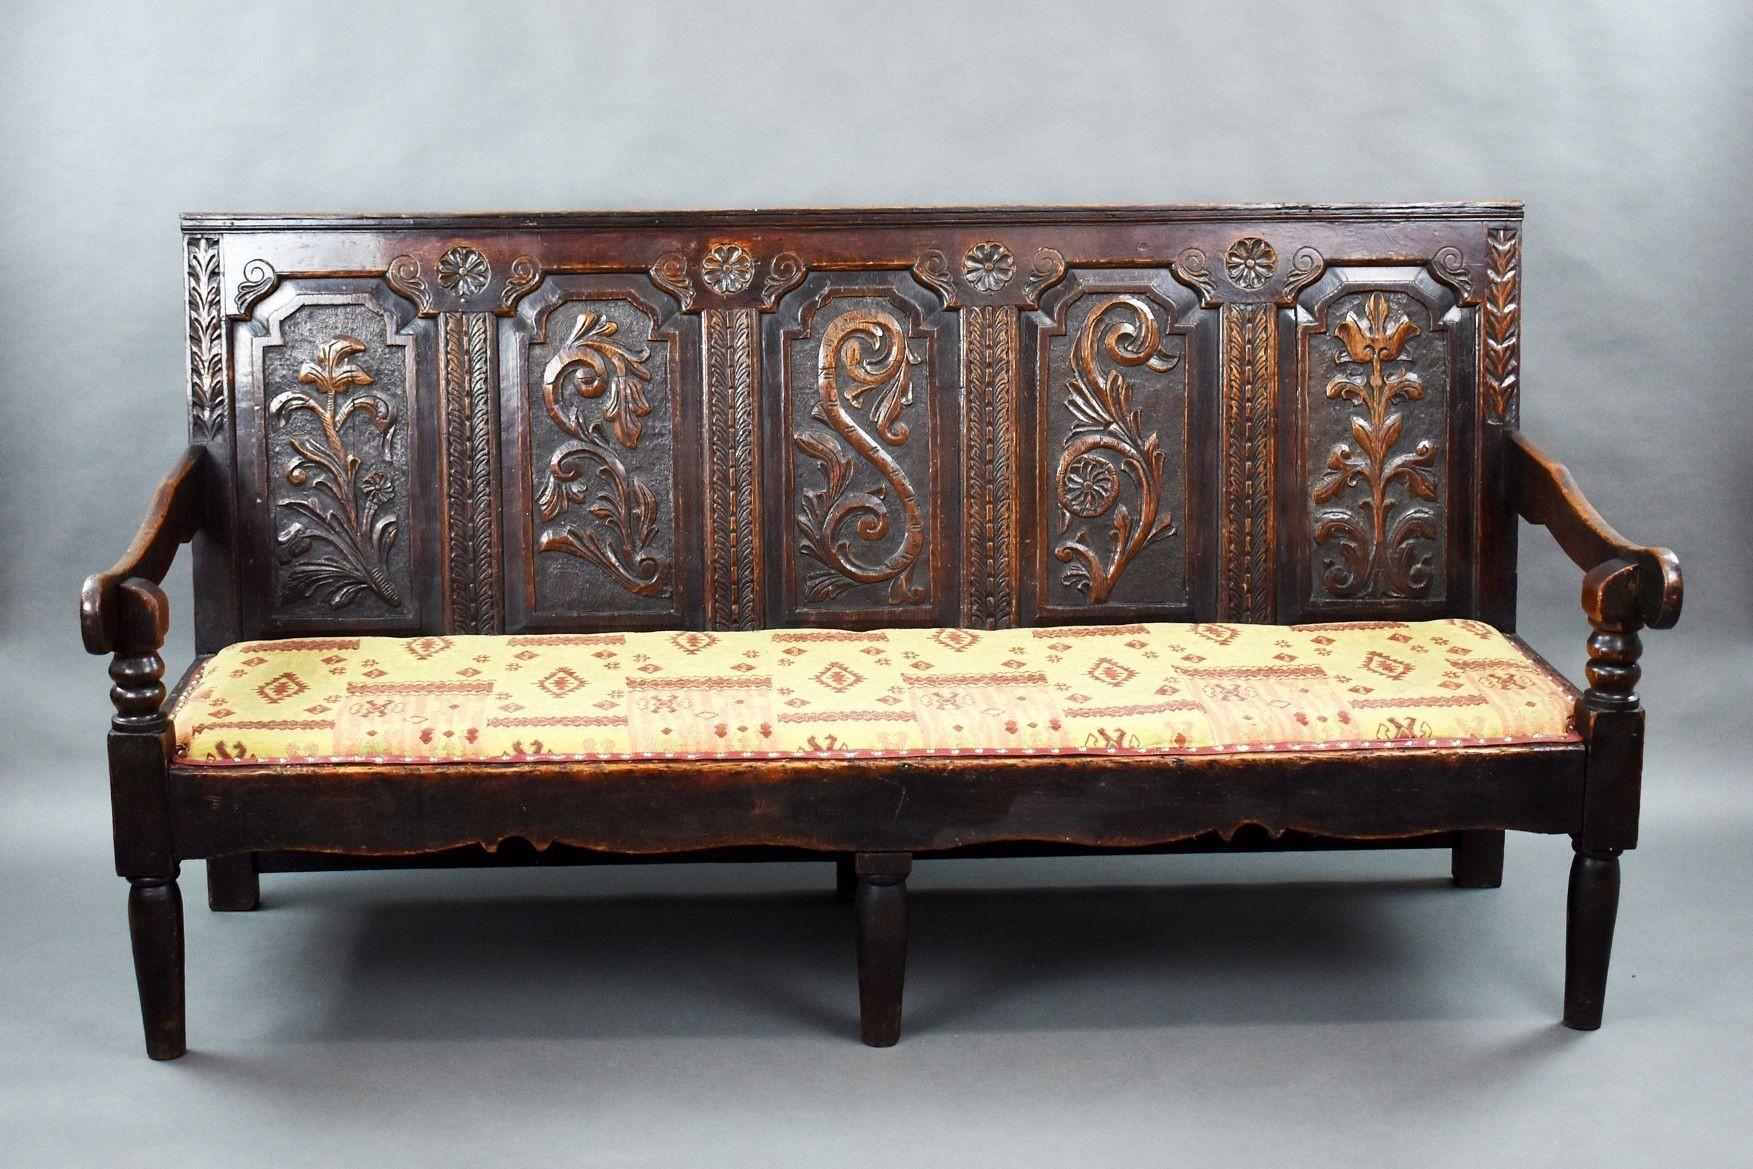 18th century Carved Oak settle with upholstered seat with profusely carved back standing on turned legs.